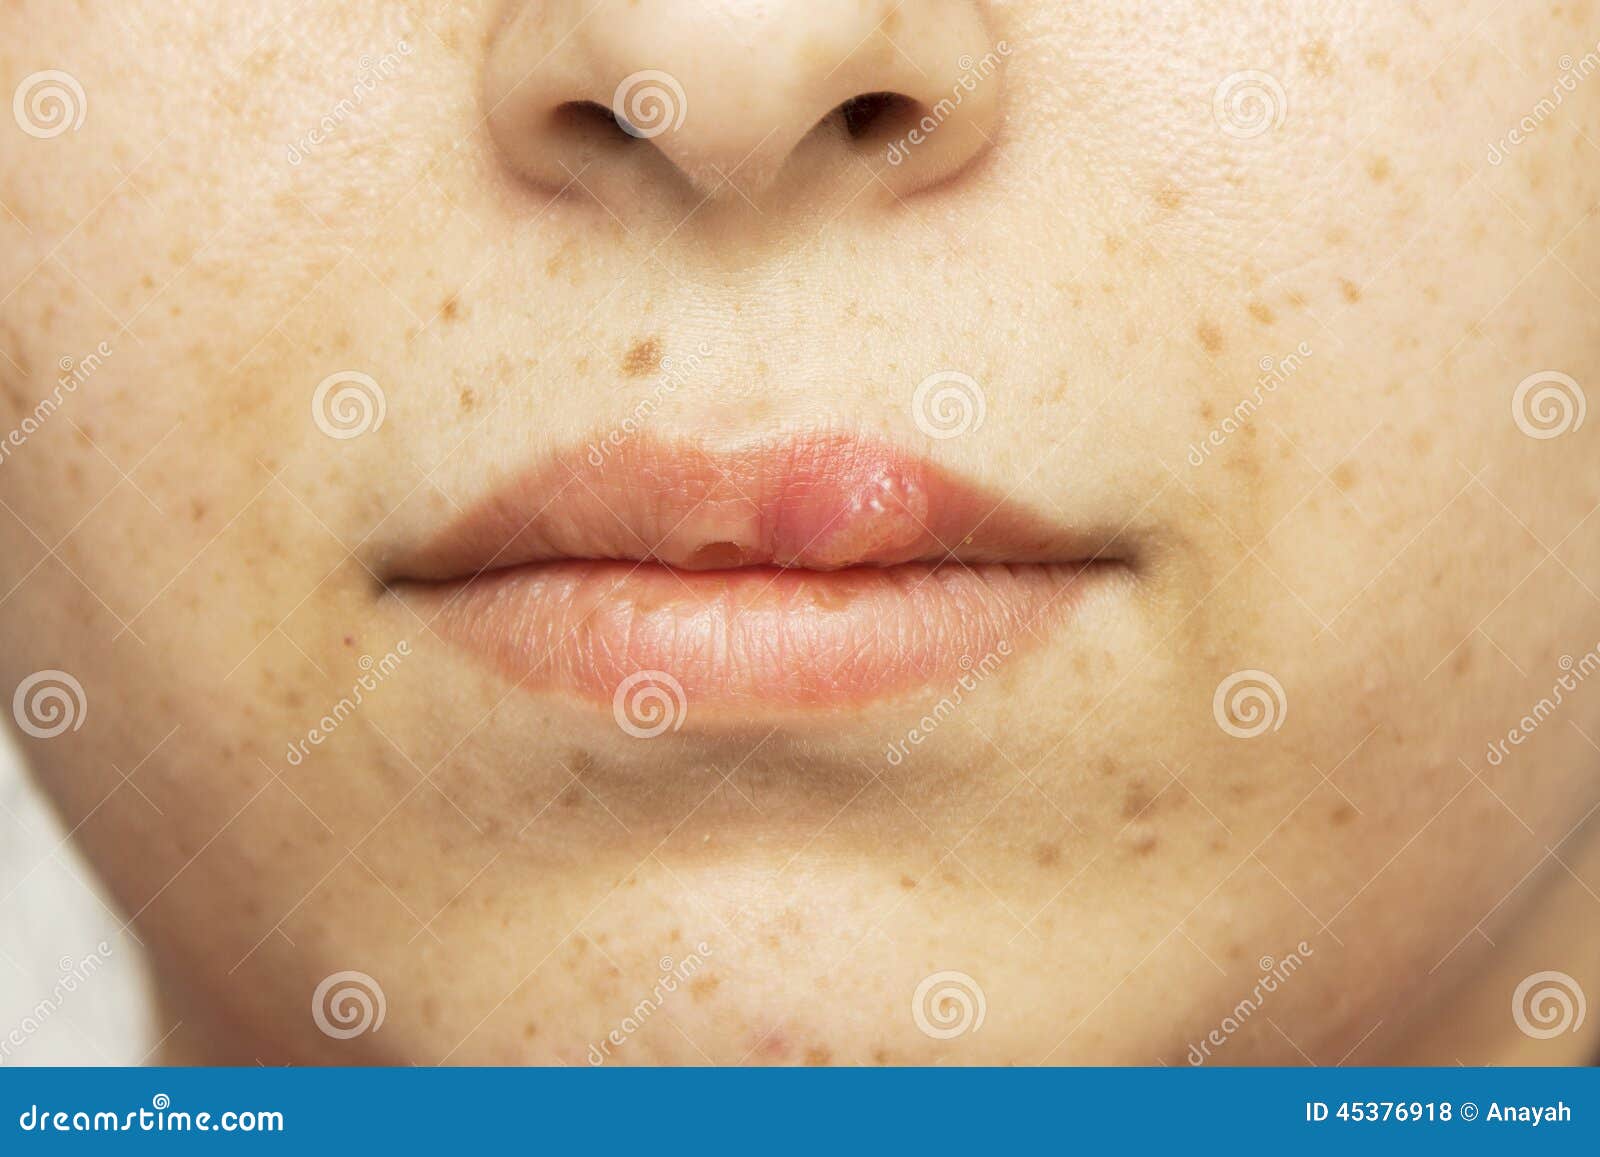 Herpes Oral Cold Sore Blisters On The Lips Herpes Simplex Stock Photo